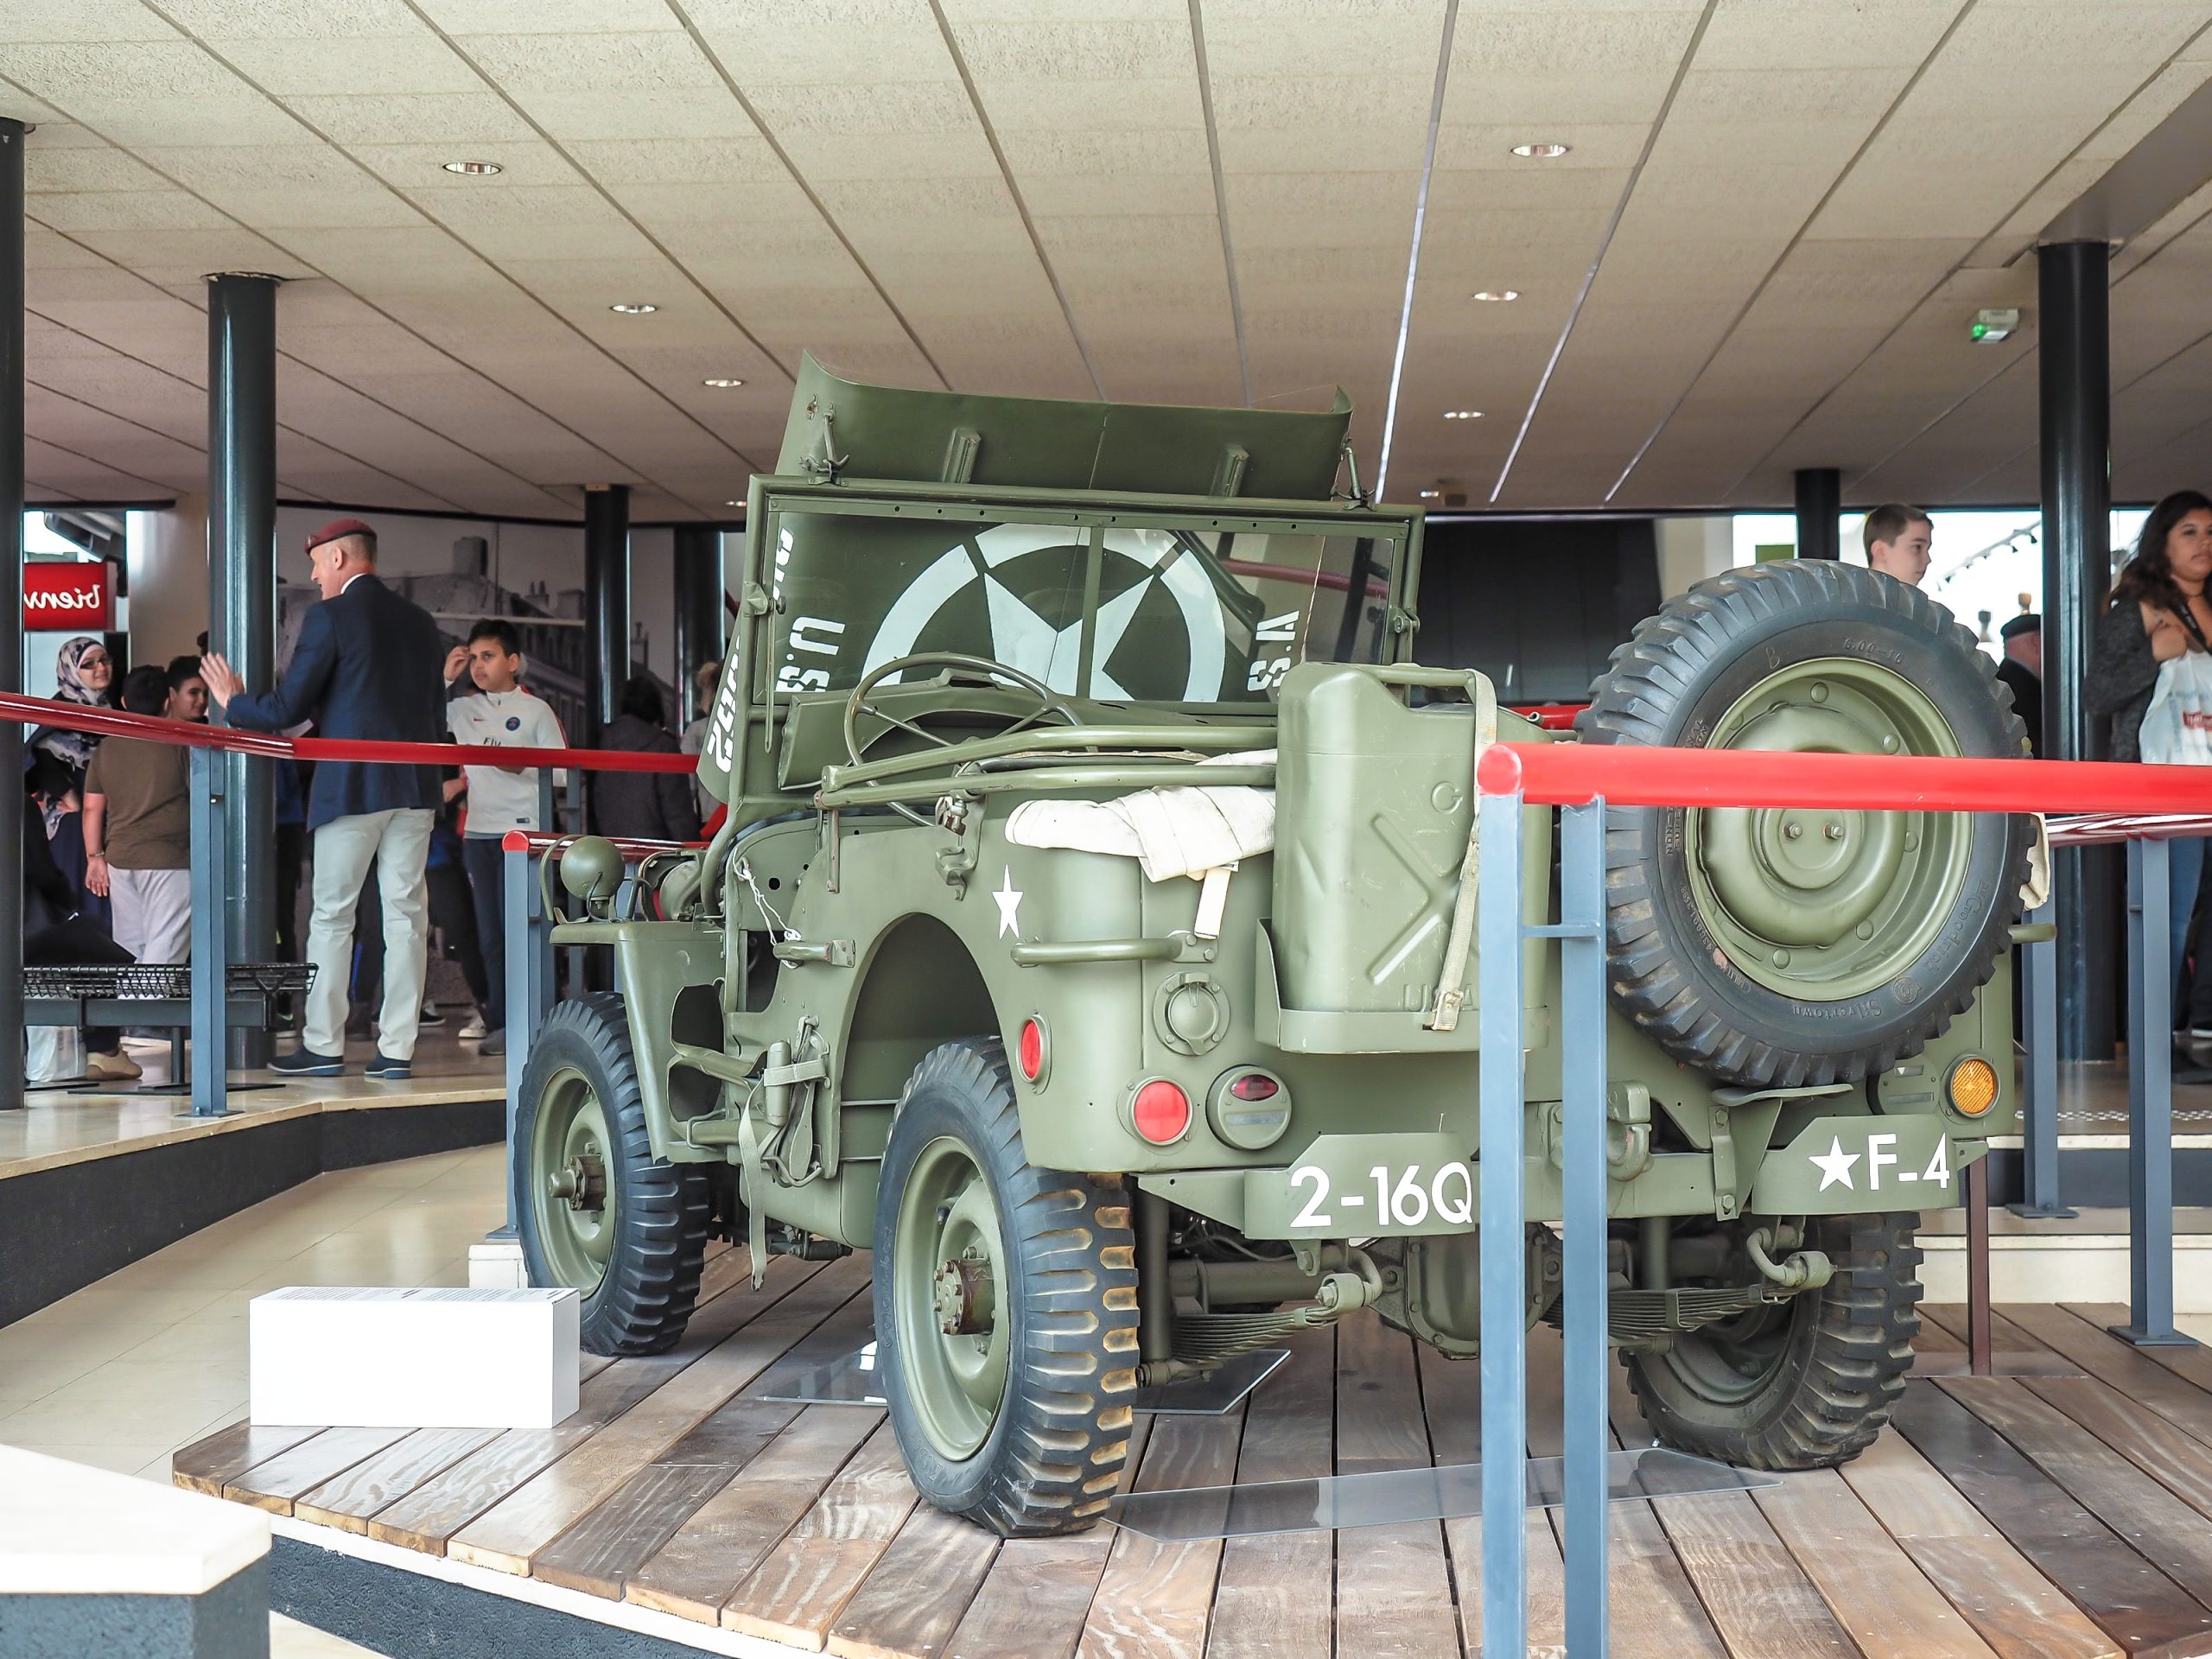 14 Must-Visit Normandy Museums for WWII Enthusiasts | D-Day Museums in Normandy, the best World War II museums in normandy for history buffs